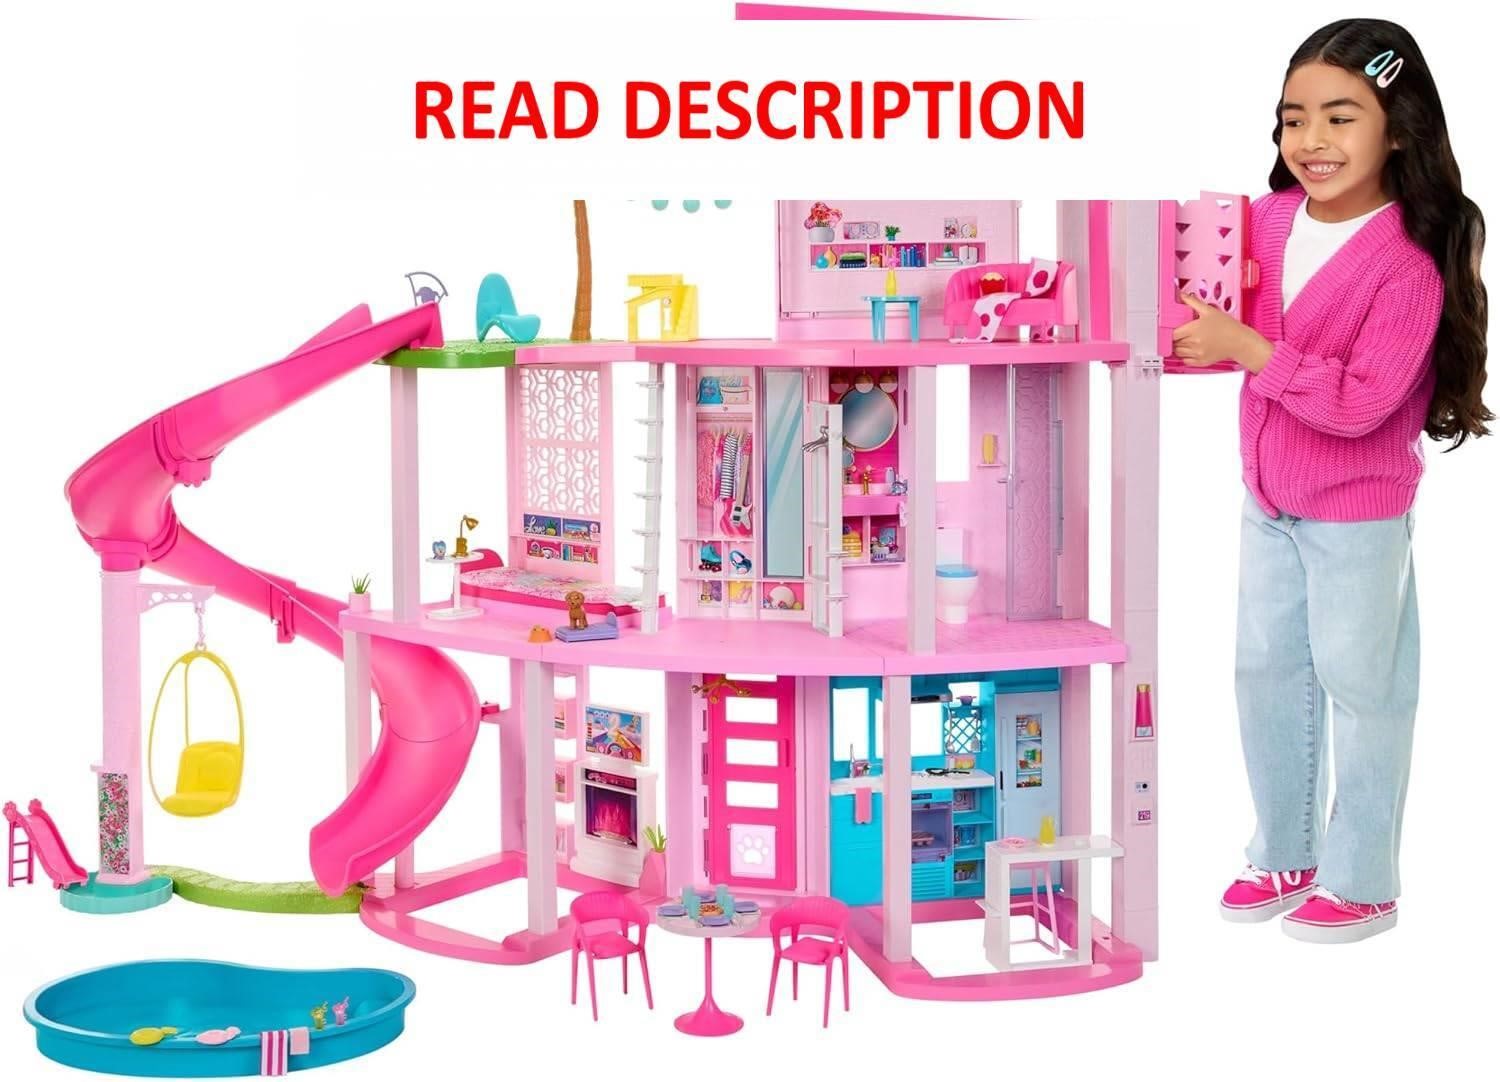 Barbie DreamHouse with 3-Story Slide